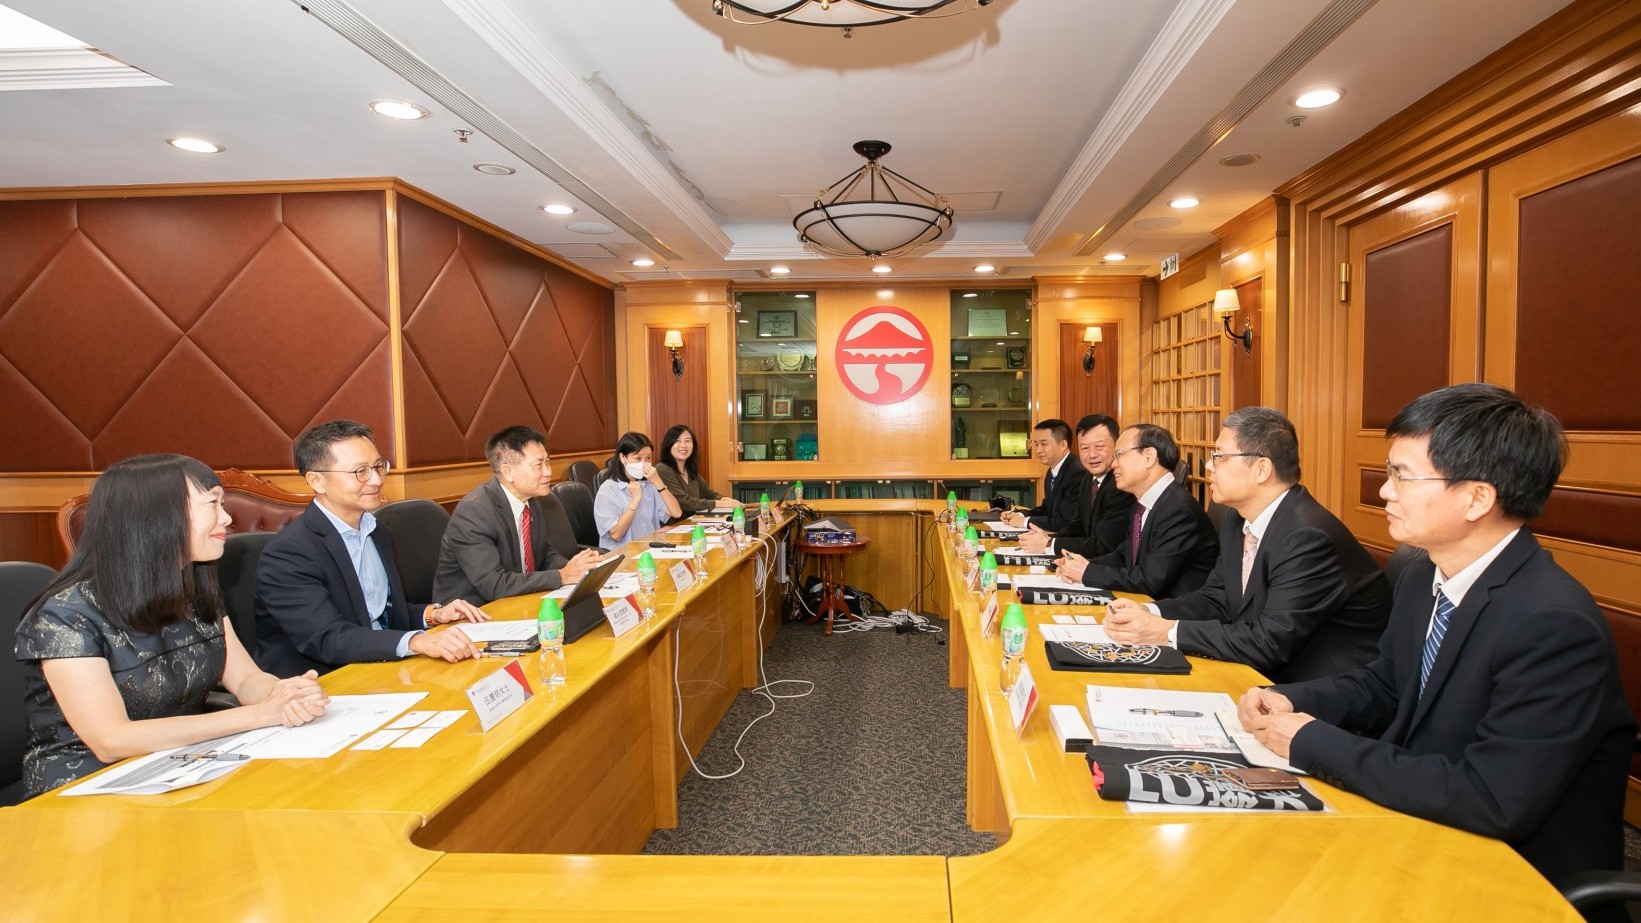 Delegation from Guangdong University of Technology visits Lingnan